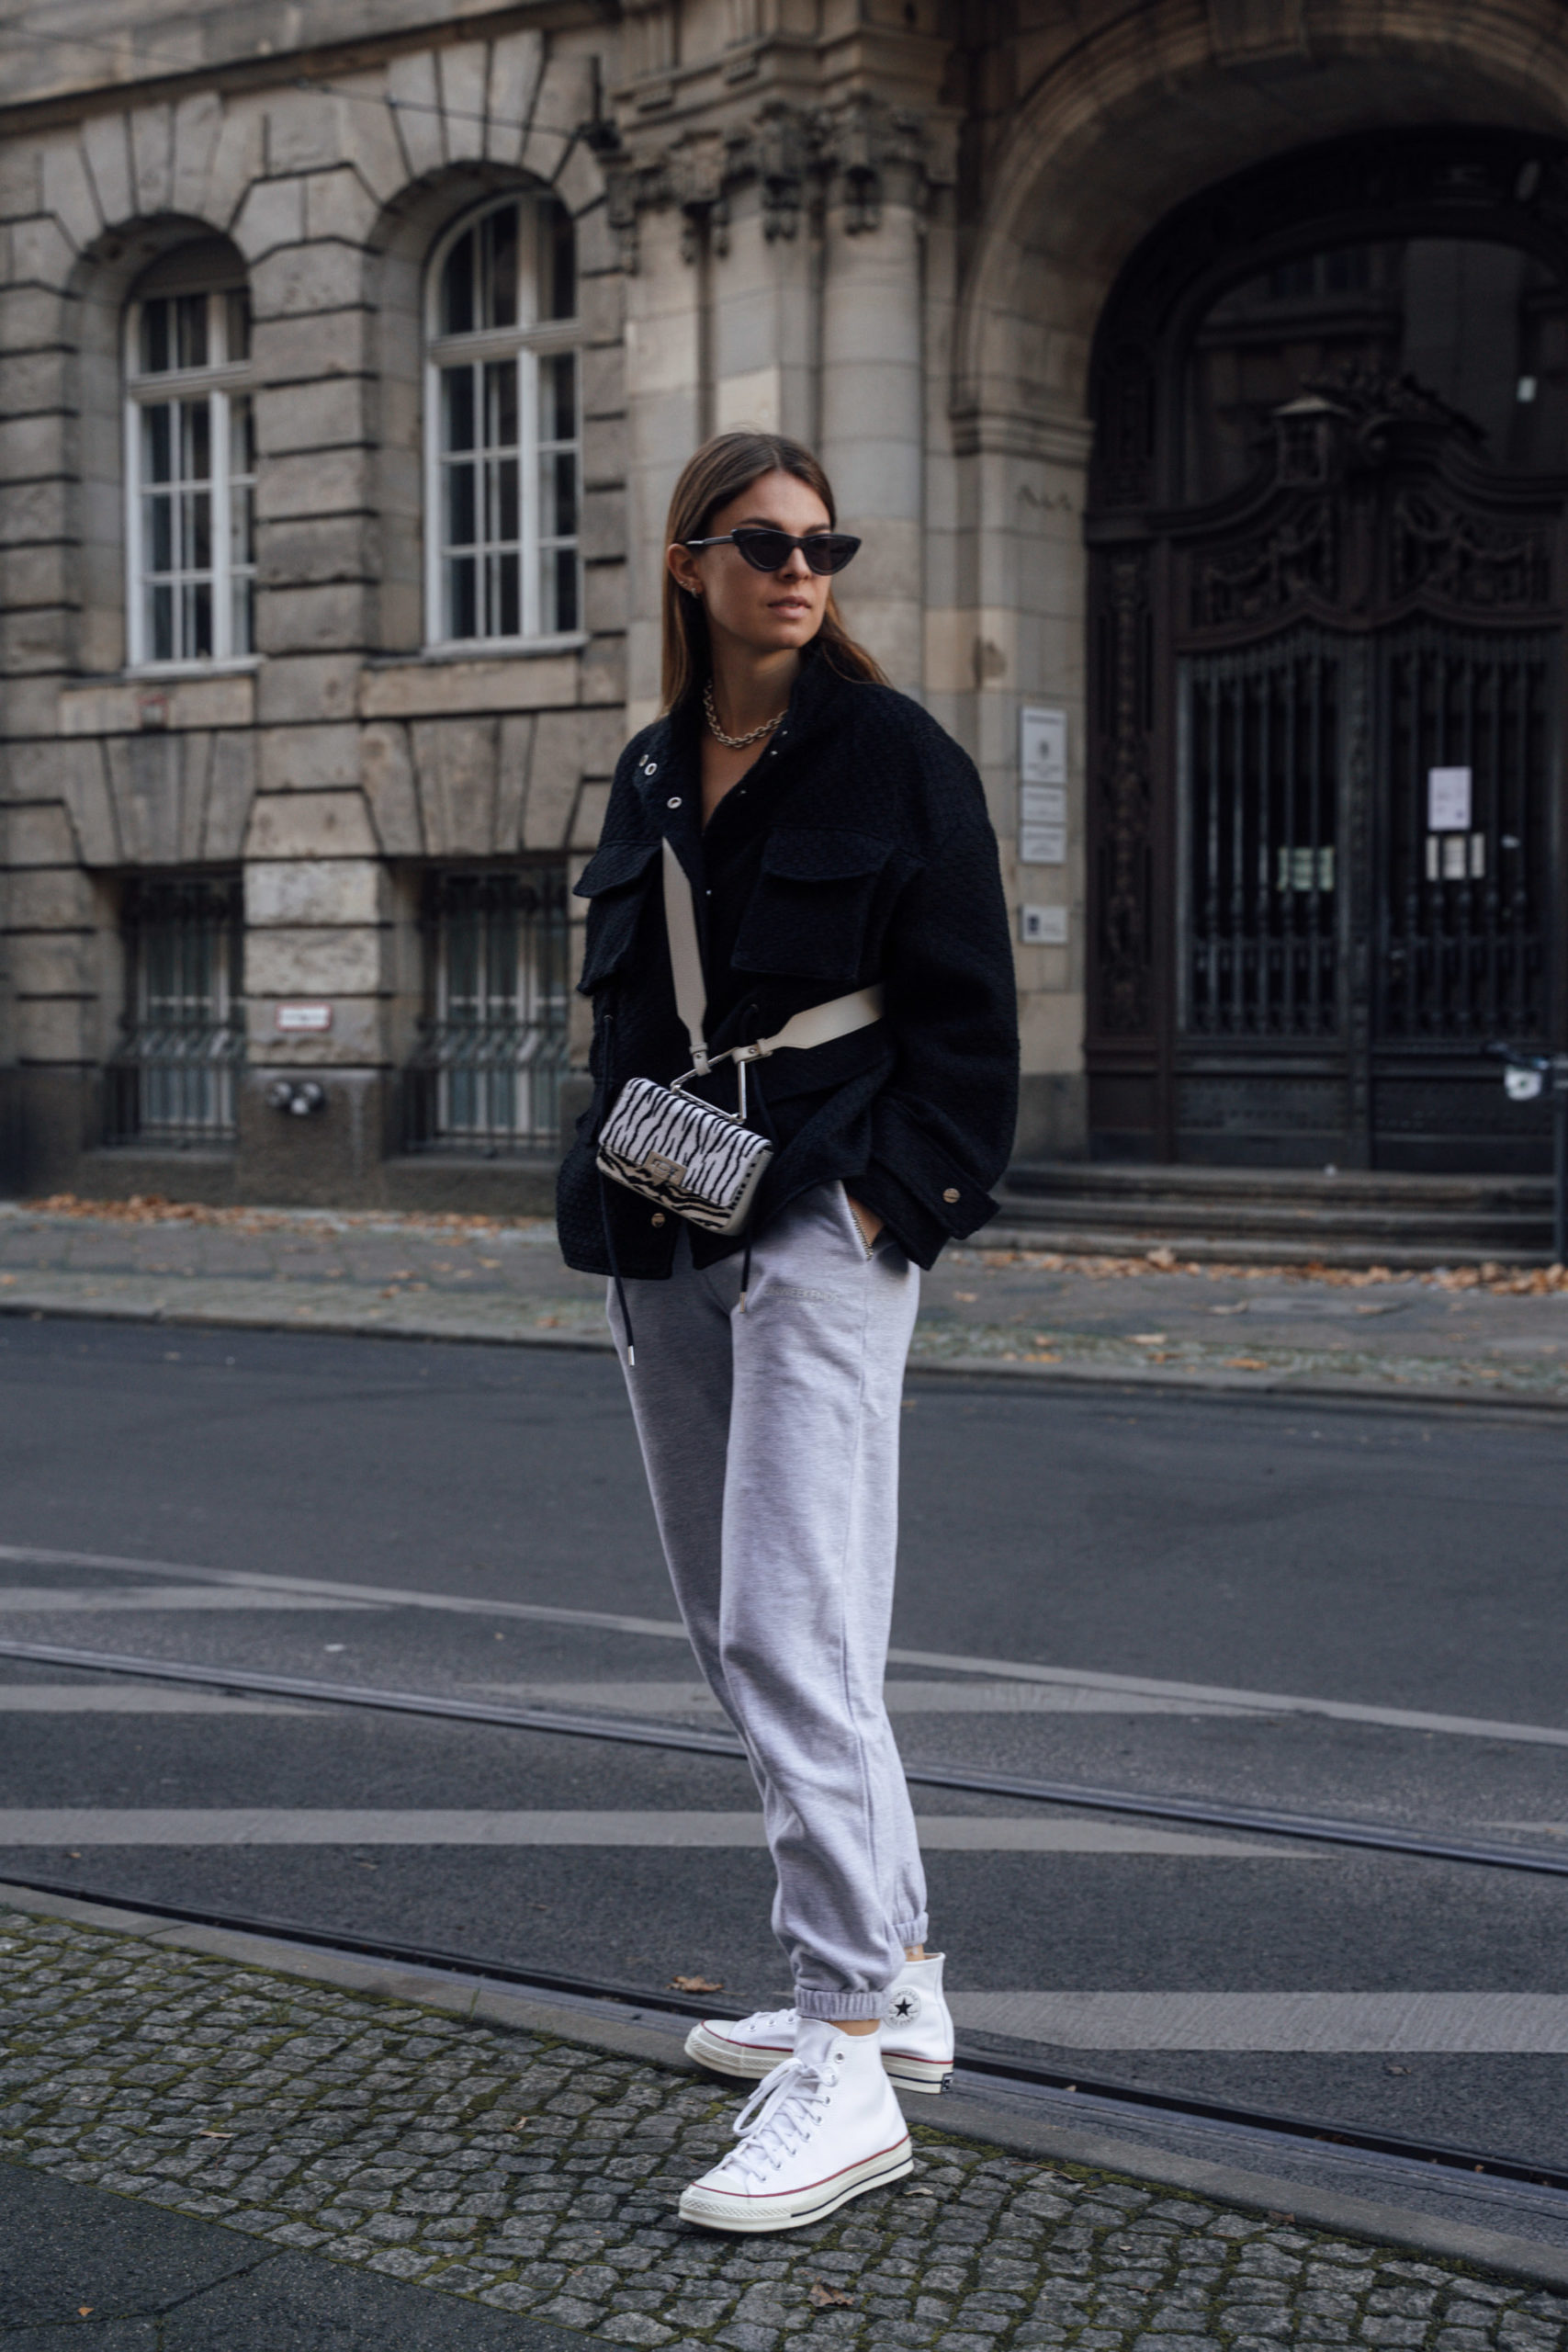 How To Style Black Sweatpants